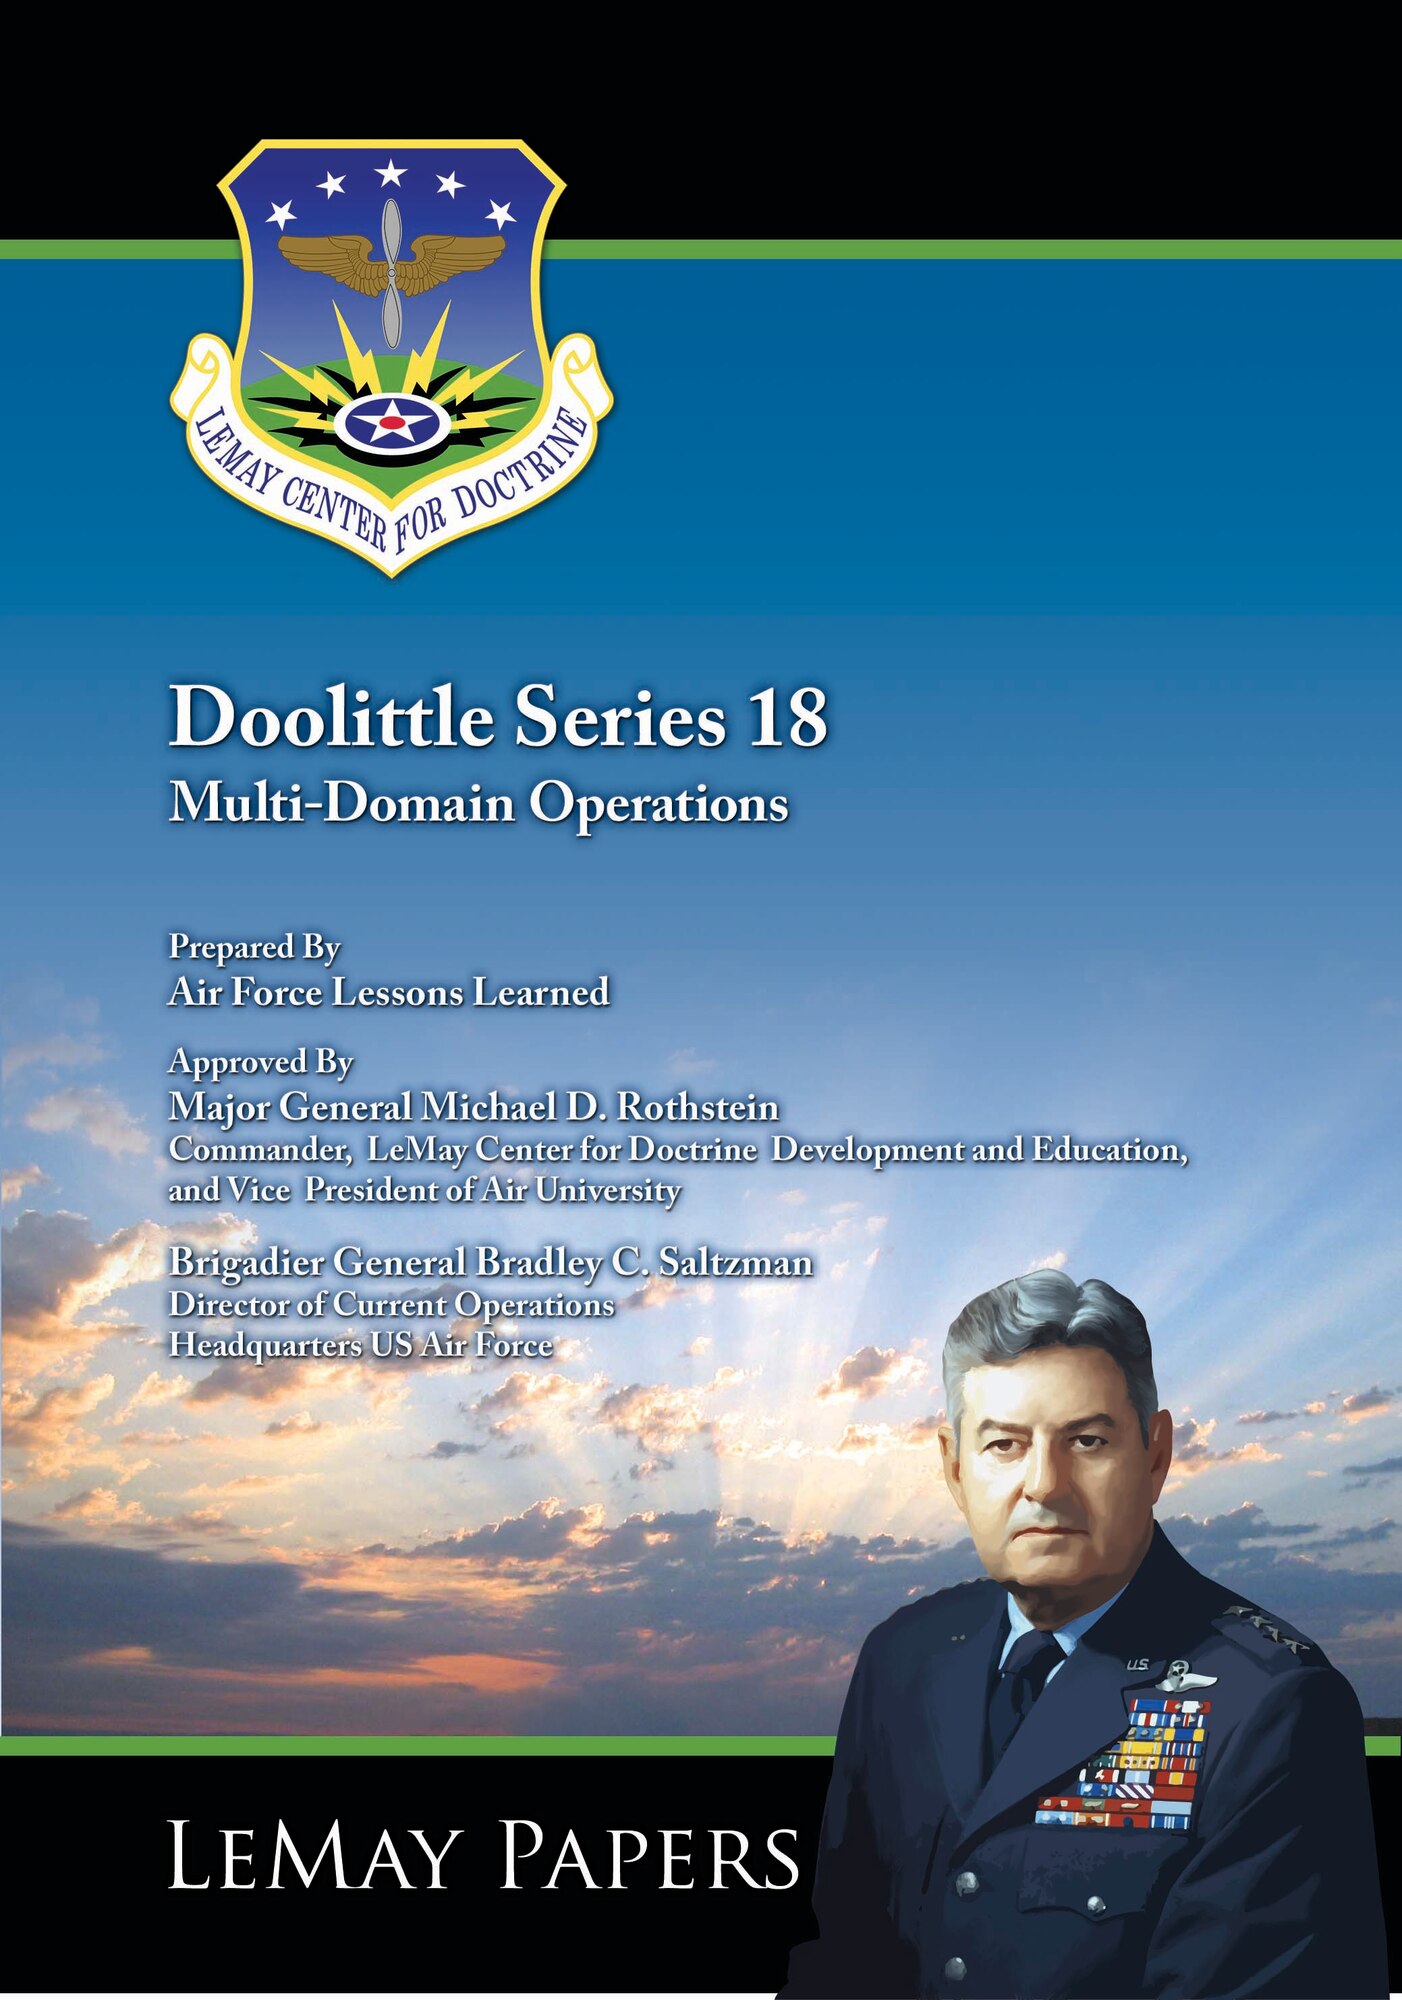 Air University Press publishes LeMay Paper No. 3—Doolittle Series 18: Multi-Domain Operations